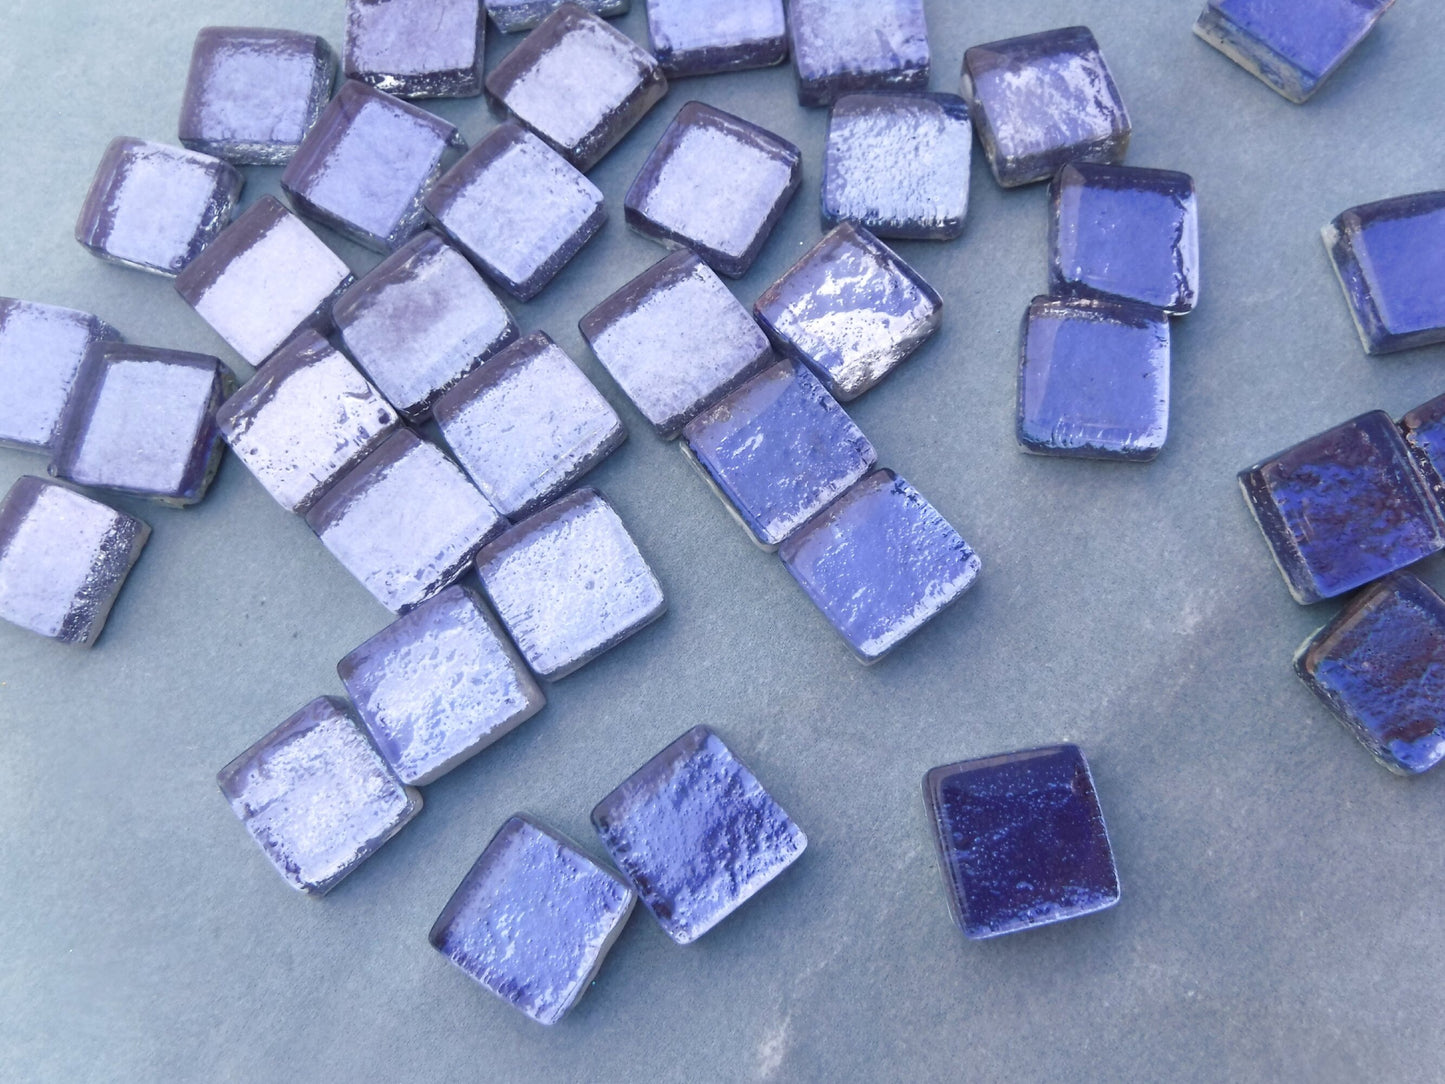 Iced Lilac Foil Square Crystal Tiles - 12mm - 50g Purple - Approx 25 Metallic Glass Mosaic Tiles